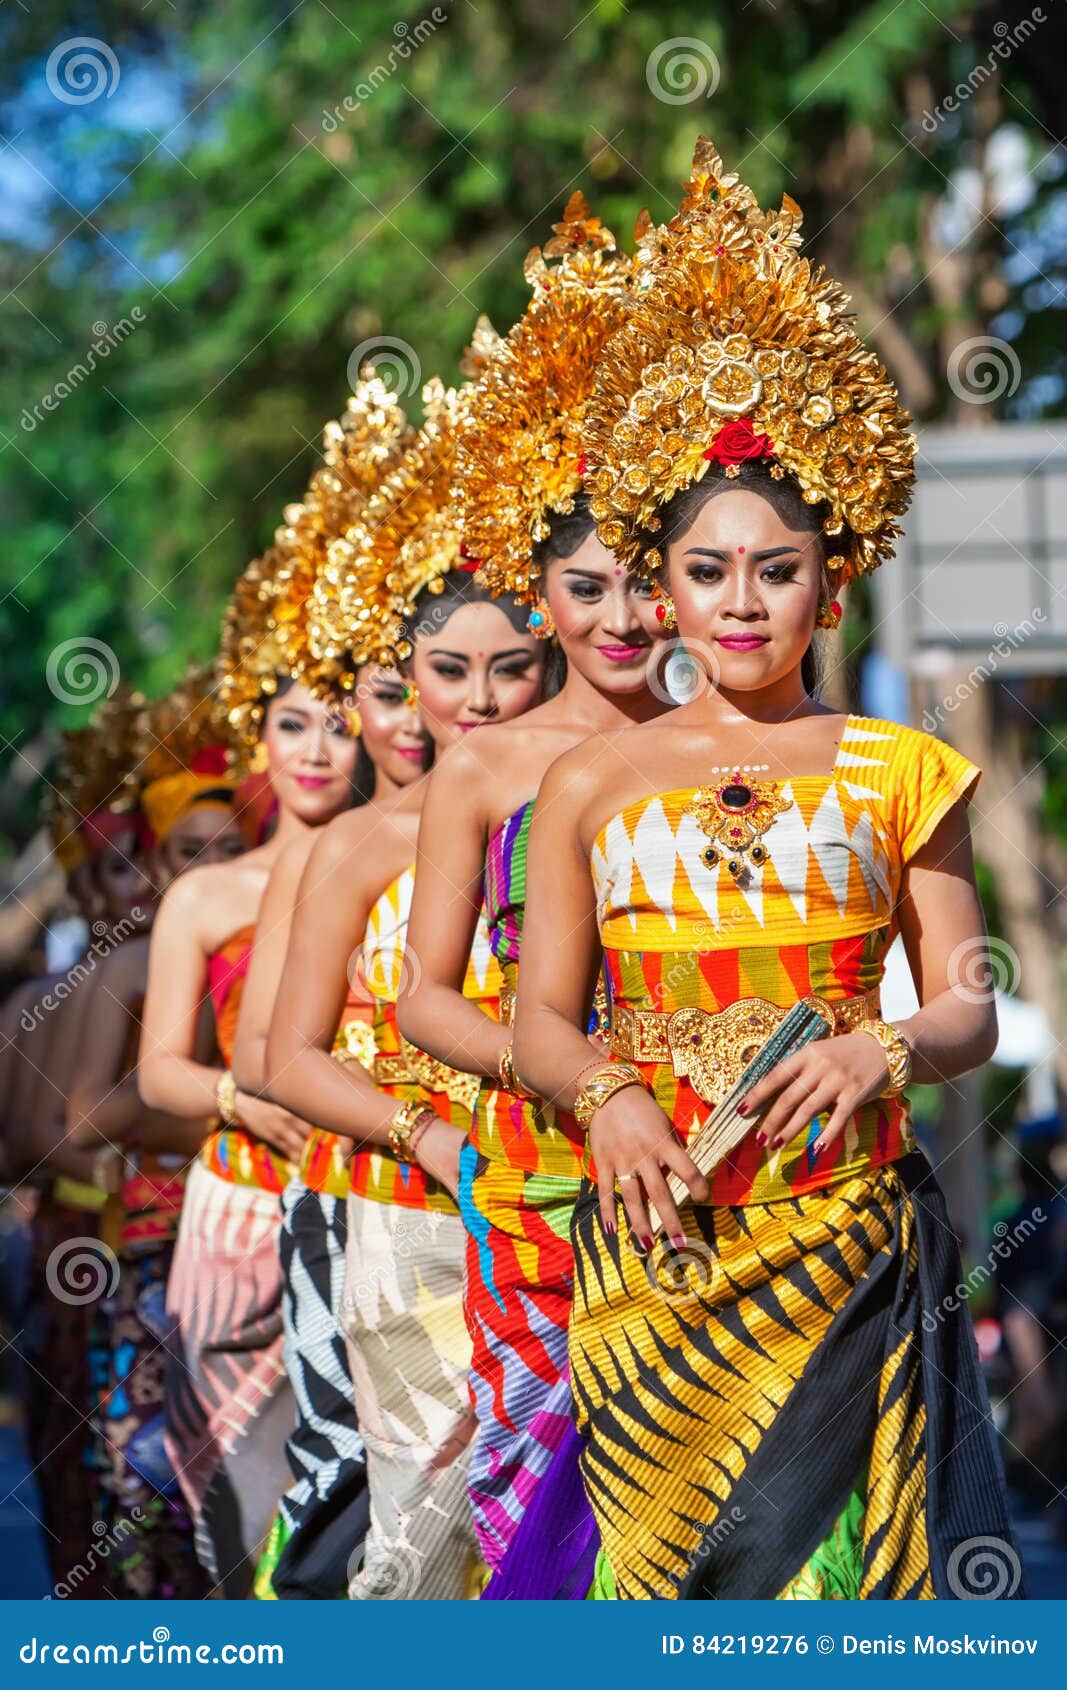 Types of Balinese Traditional Clothing That Are Characteristic